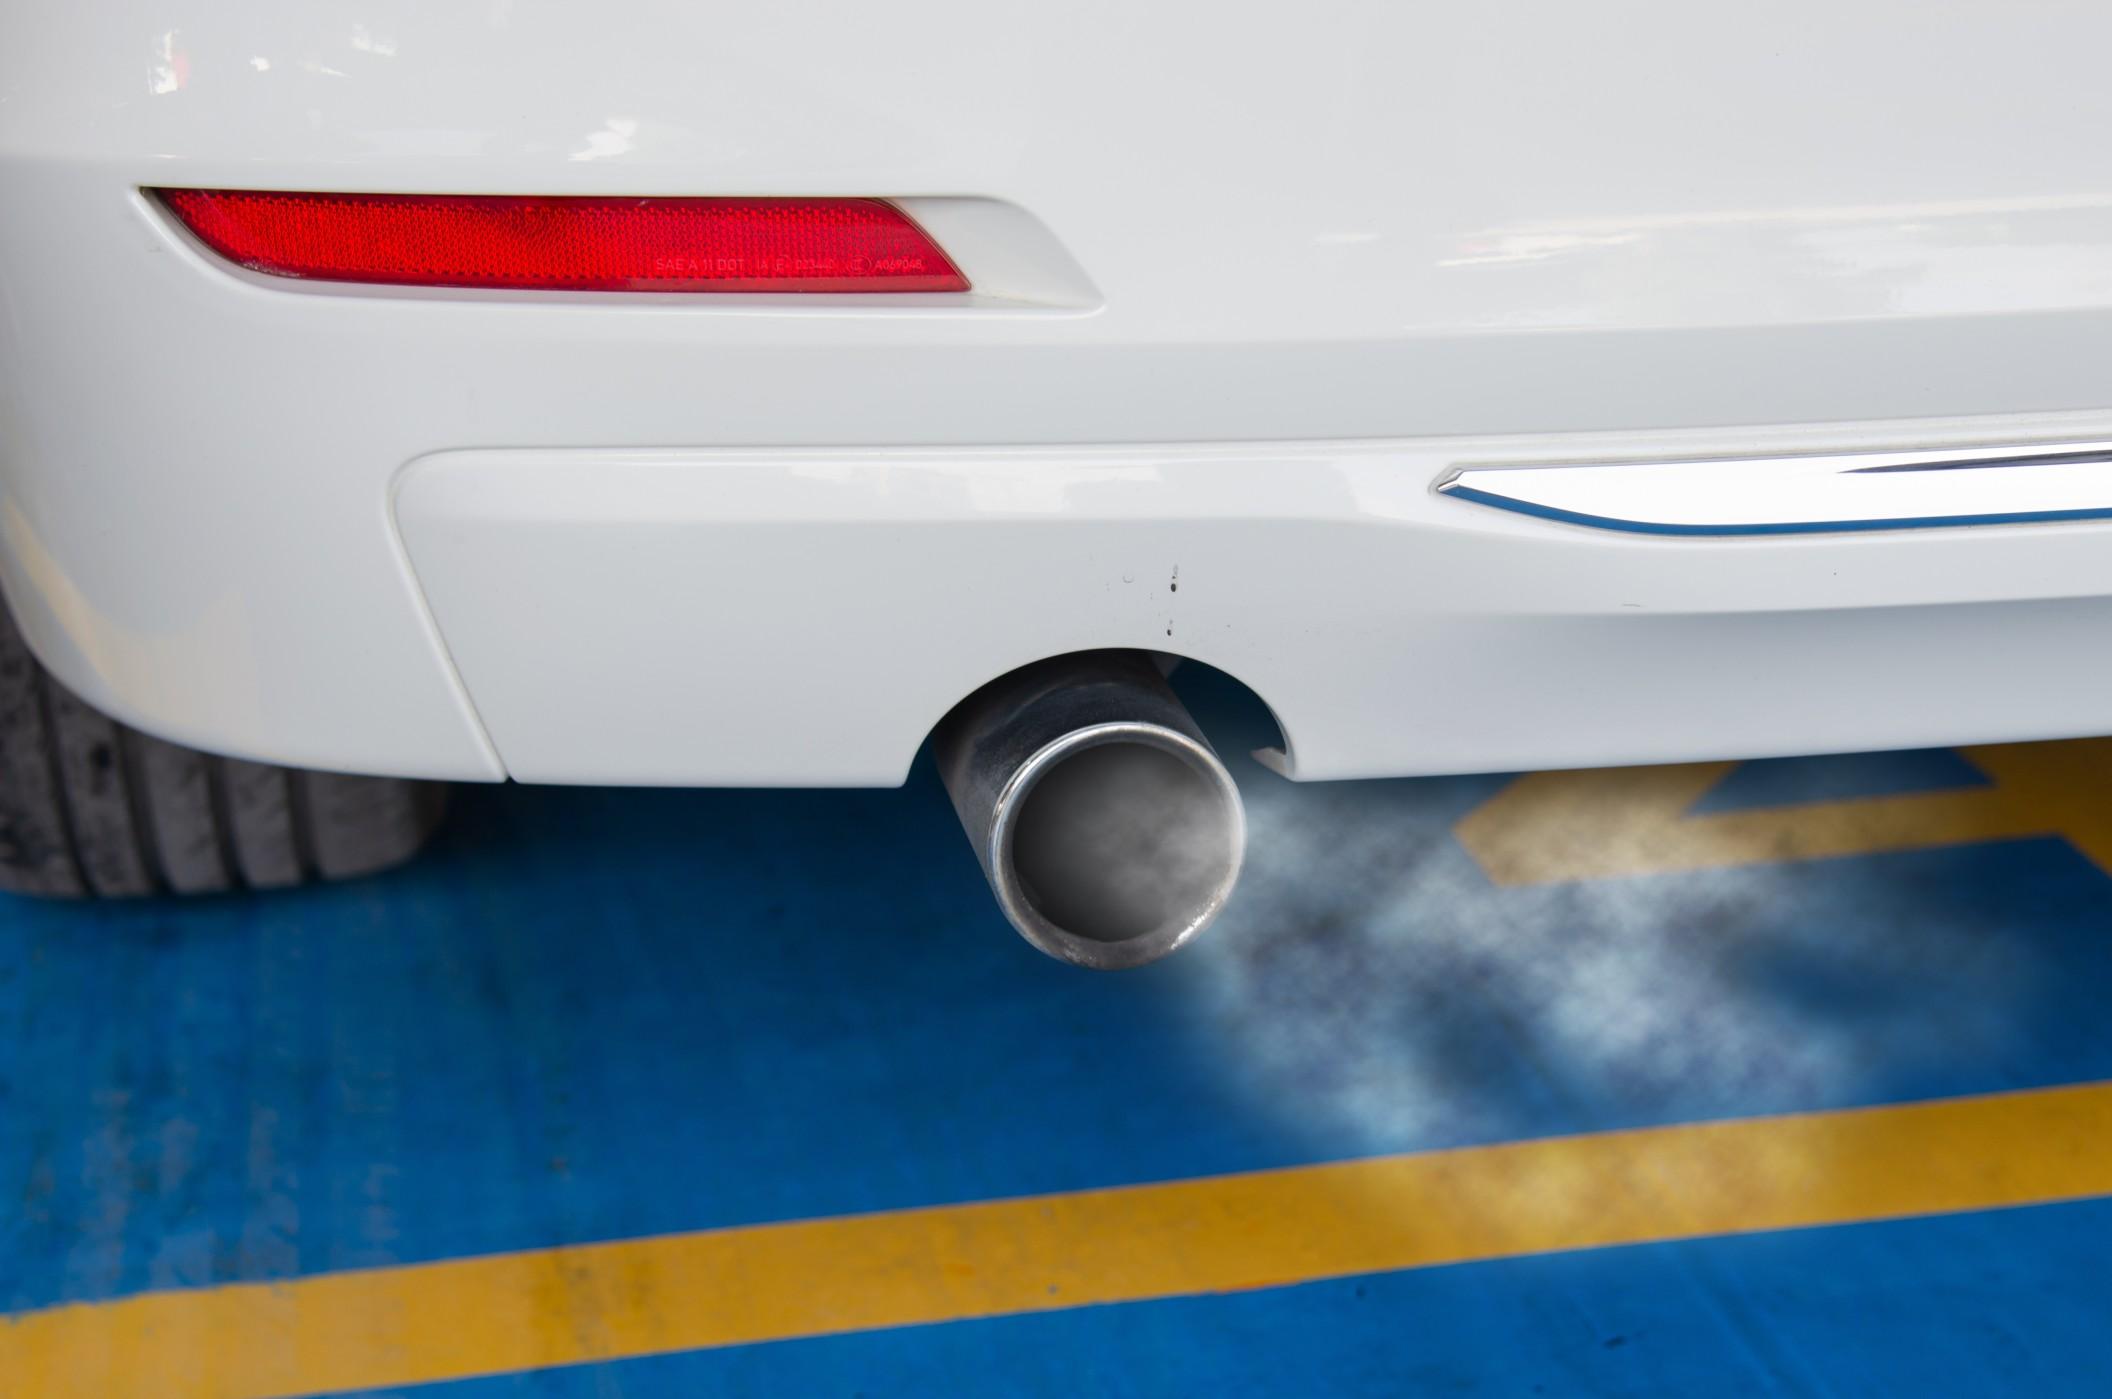 Thick plumes of white smoke from a car often come from water or coolant burning.